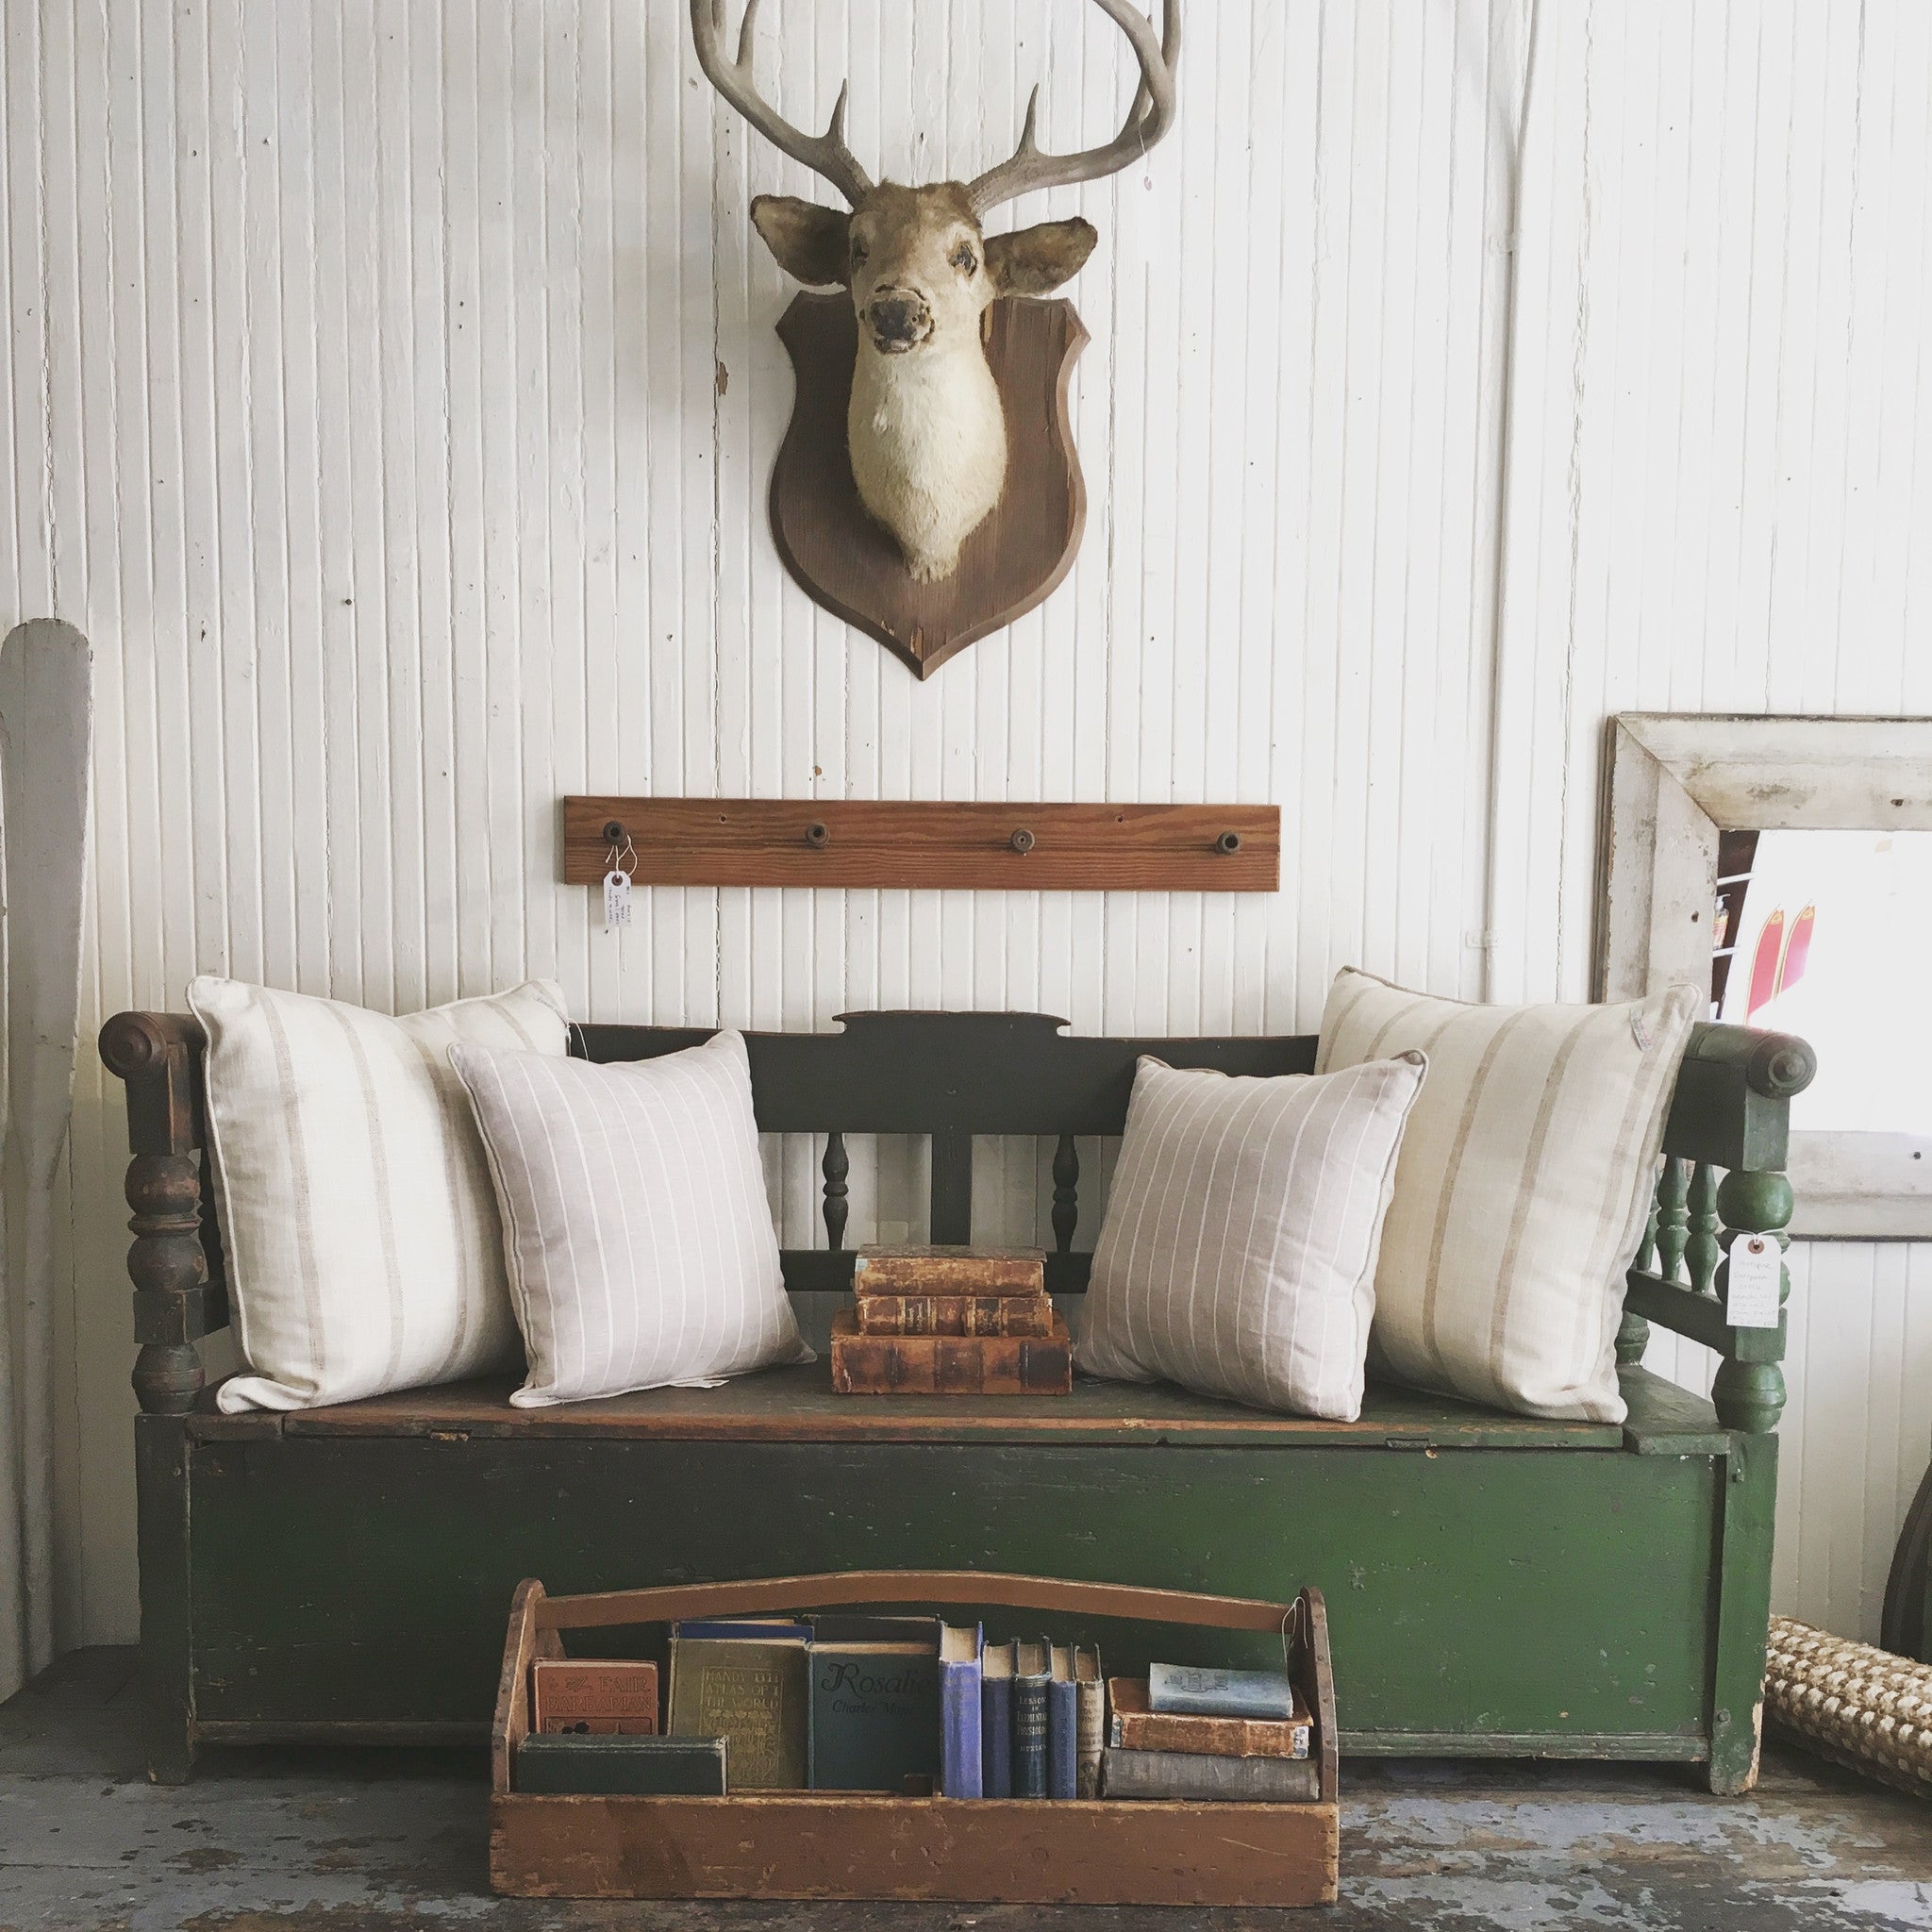 Antique bench, vintage tool box and an antique farm table at the Vintage Retriever